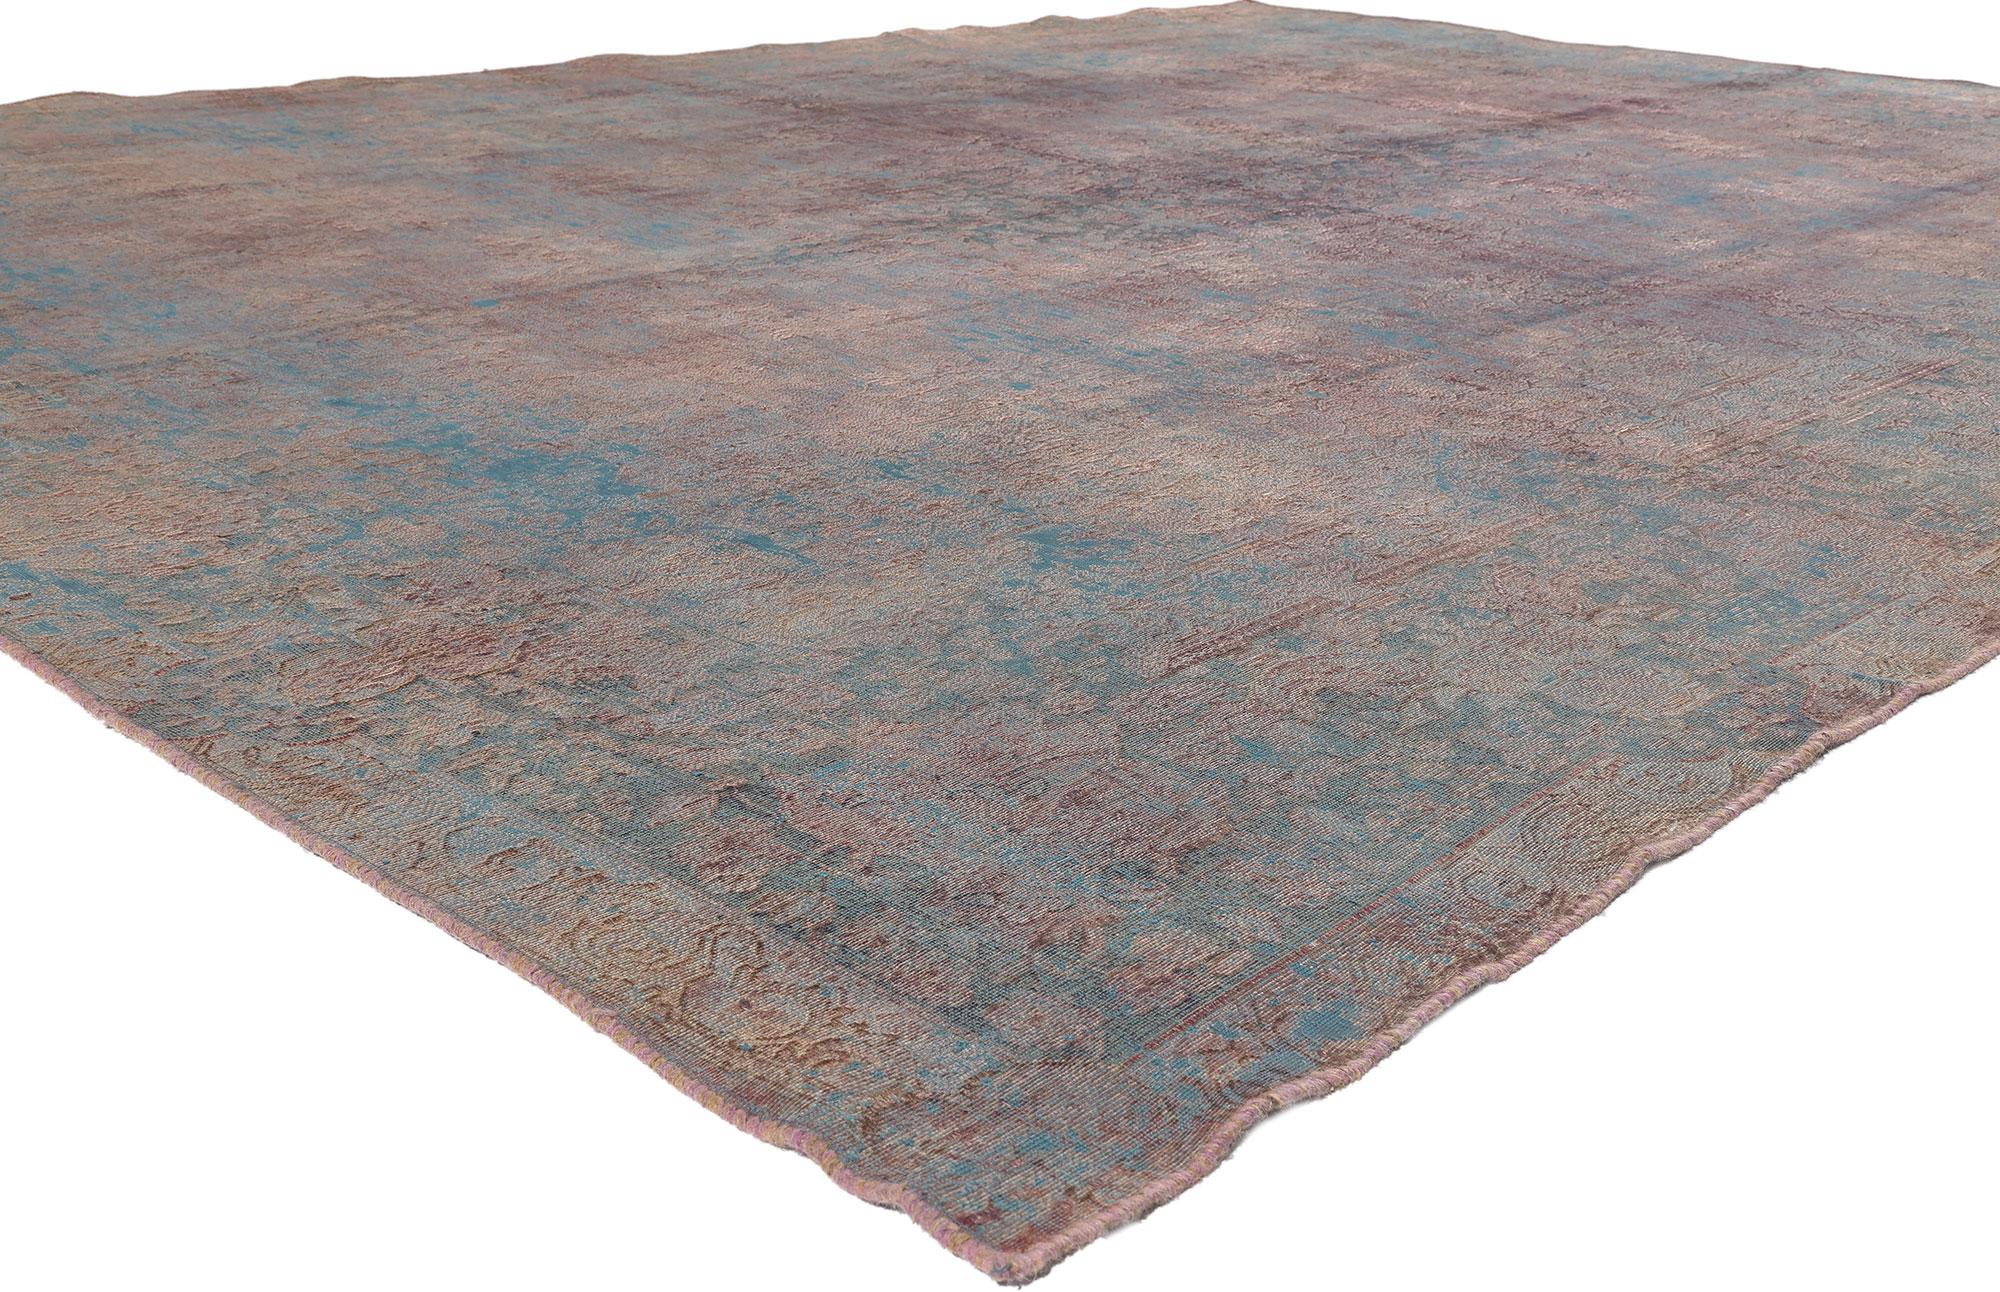 60612 Vintage Turkish Overdyed Rug, 09'09 x 13'02. 
​Embark on a design journey where Industrial Boho effortlessly waltzes with Chic City Loft vibes in the form of this hand-knotted wool vintage Turkish overdyed rug. Picture it: the carefree, earthy